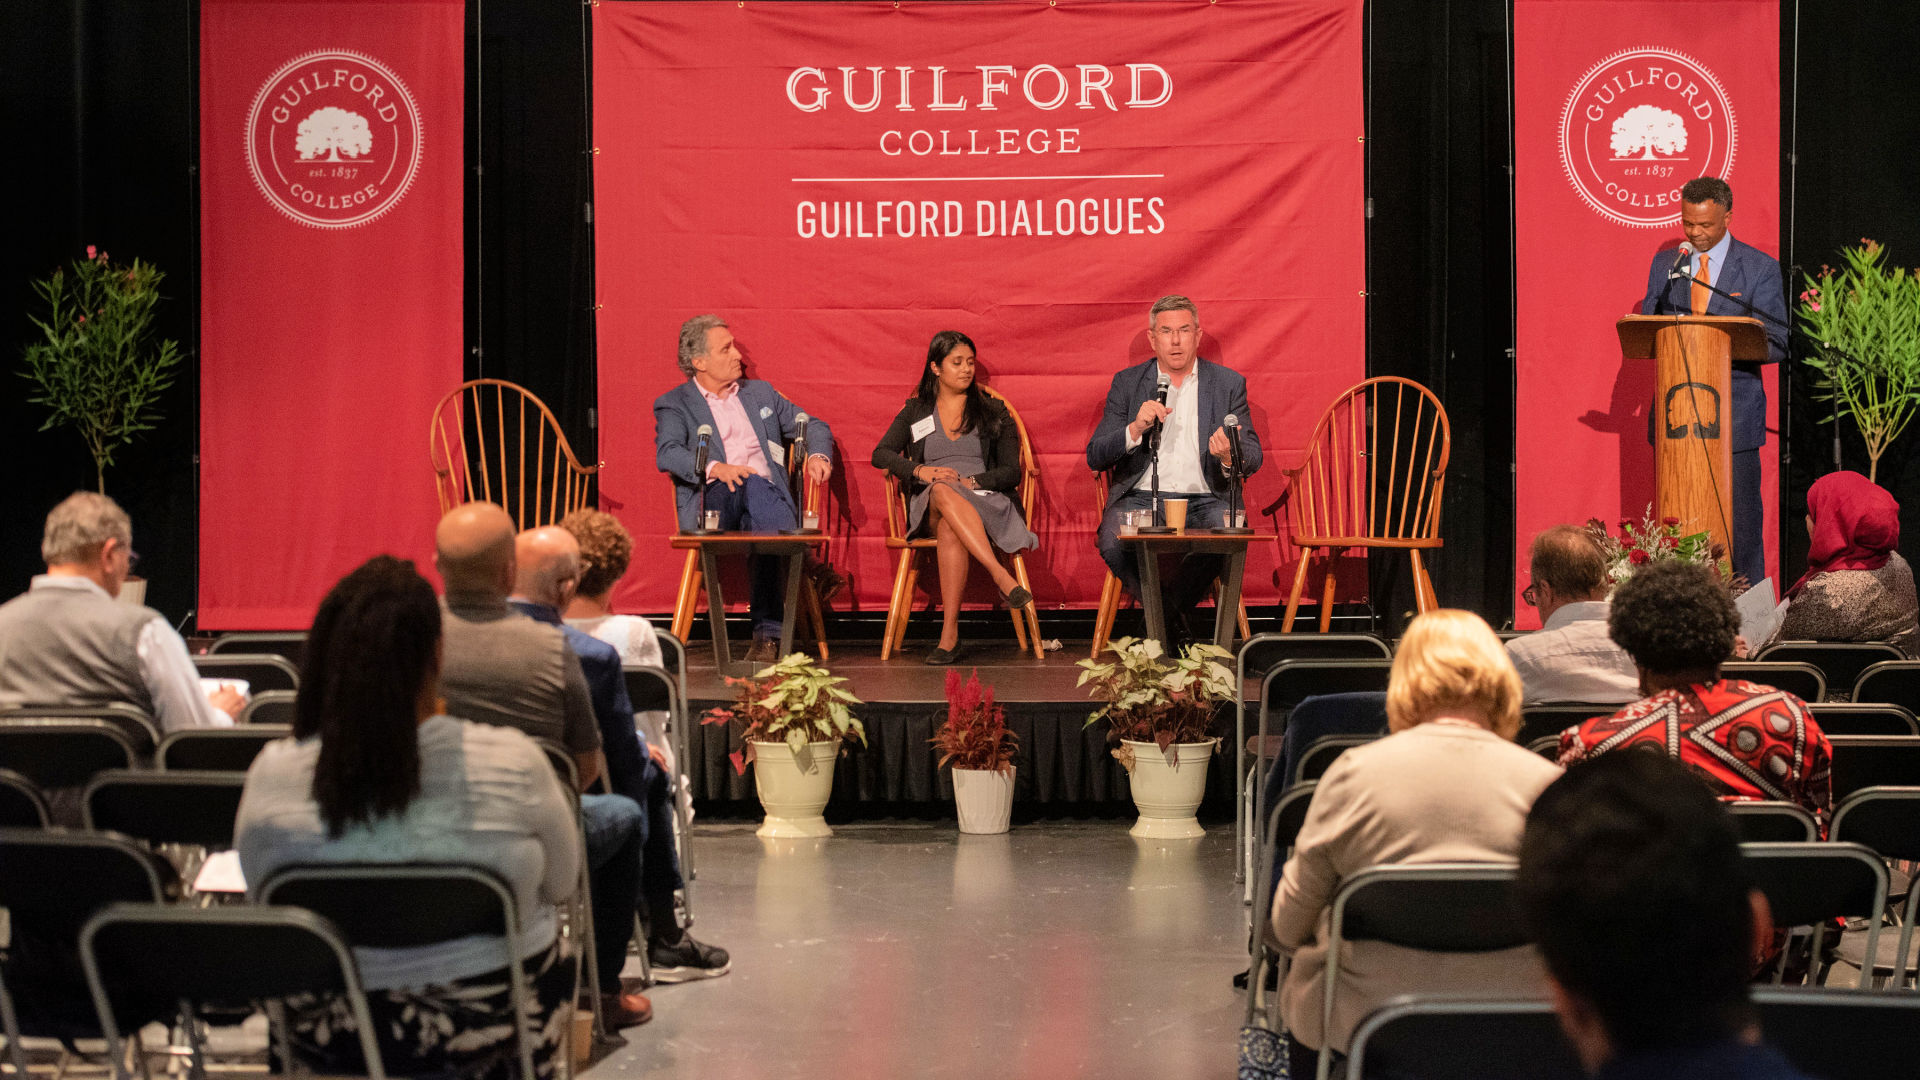 On the stage at the Guilford Dialogues, from left: Byron Loflin, Roberta Lobo, Graham Macmillian, and Danny Gatling.